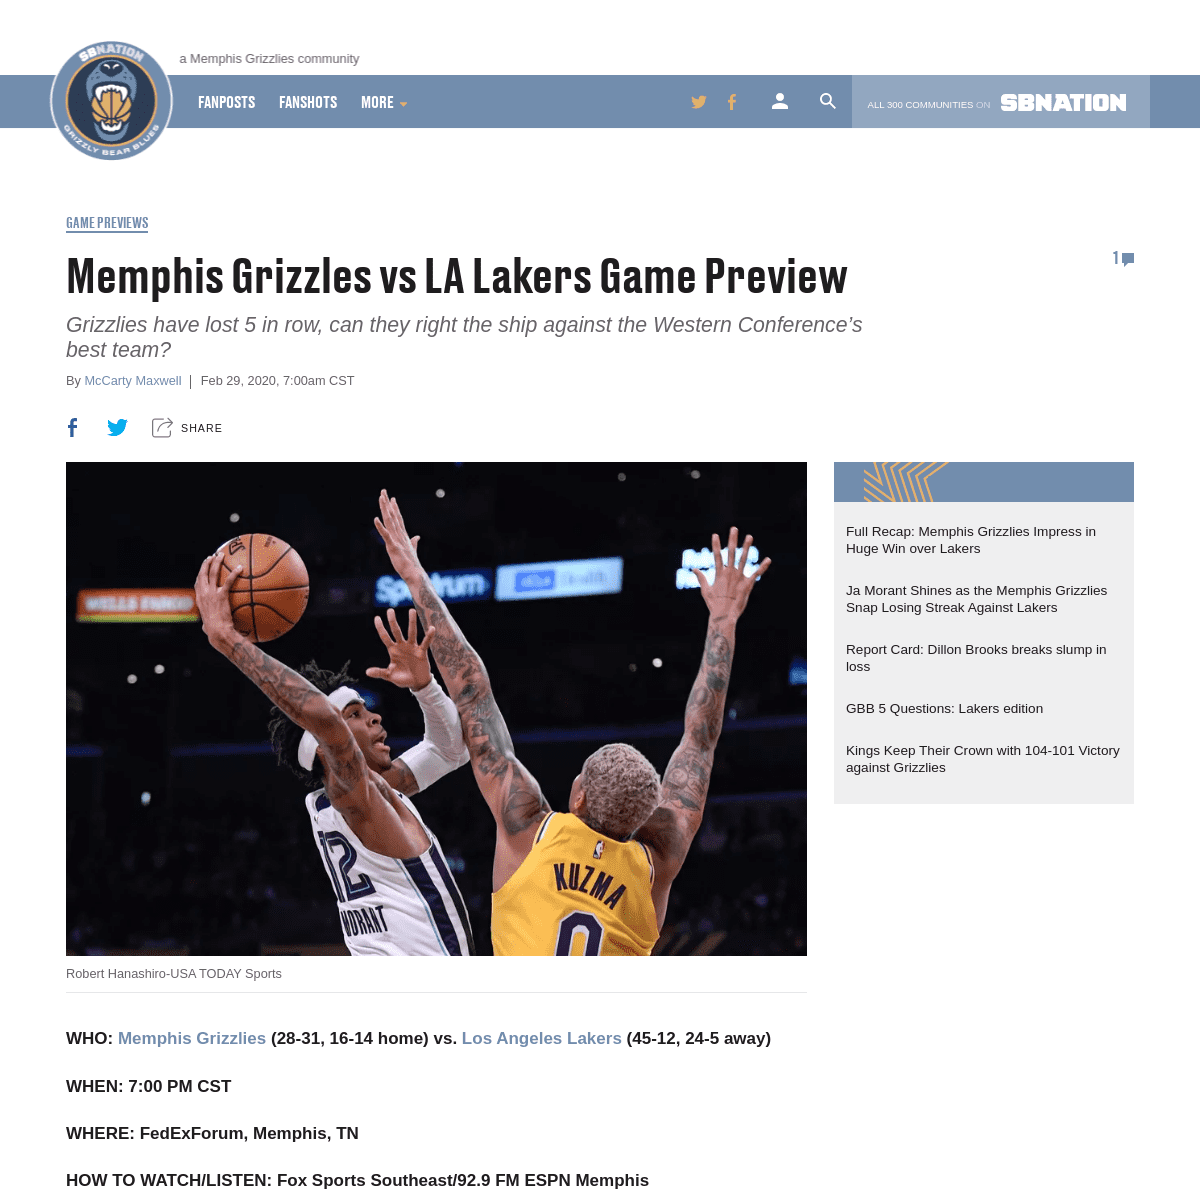 A complete backup of www.grizzlybearblues.com/2020/2/29/21158794/memphis-grizzles-vs-la-lakers-game-preview-nba-start-time-tv-in